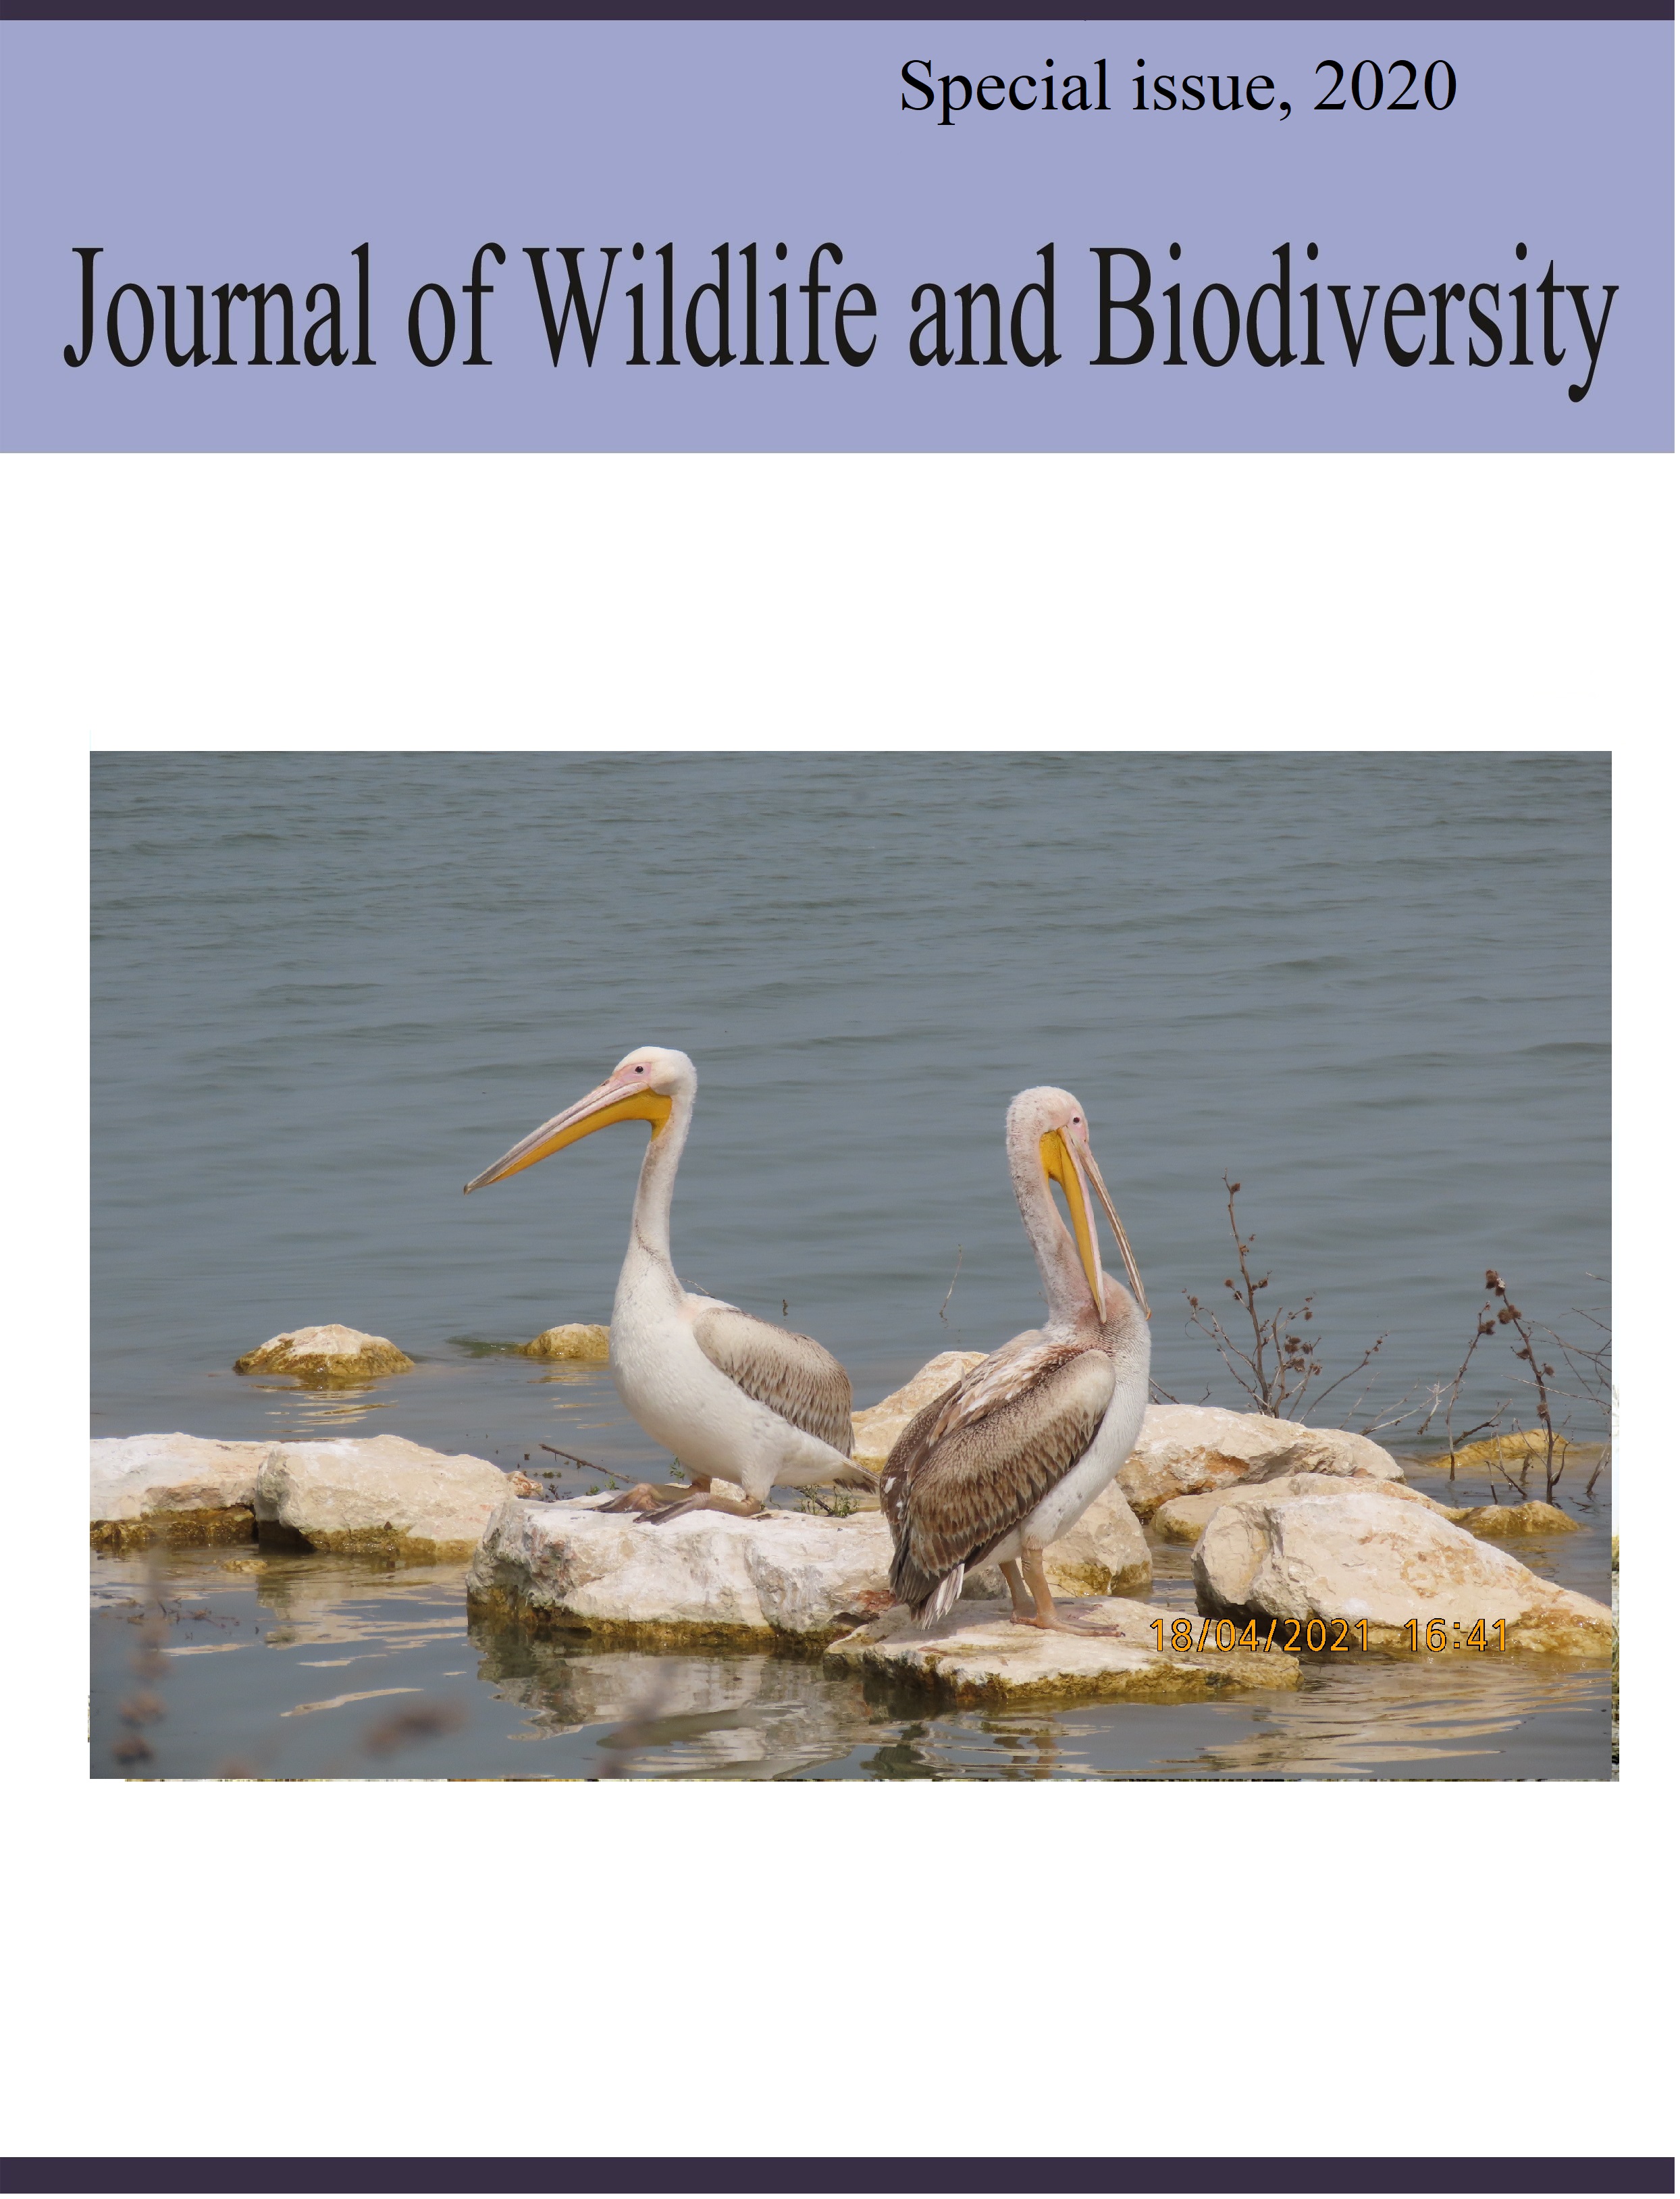 					View 2020: Special issue -Journal of Wildlife and Biodiversity
				